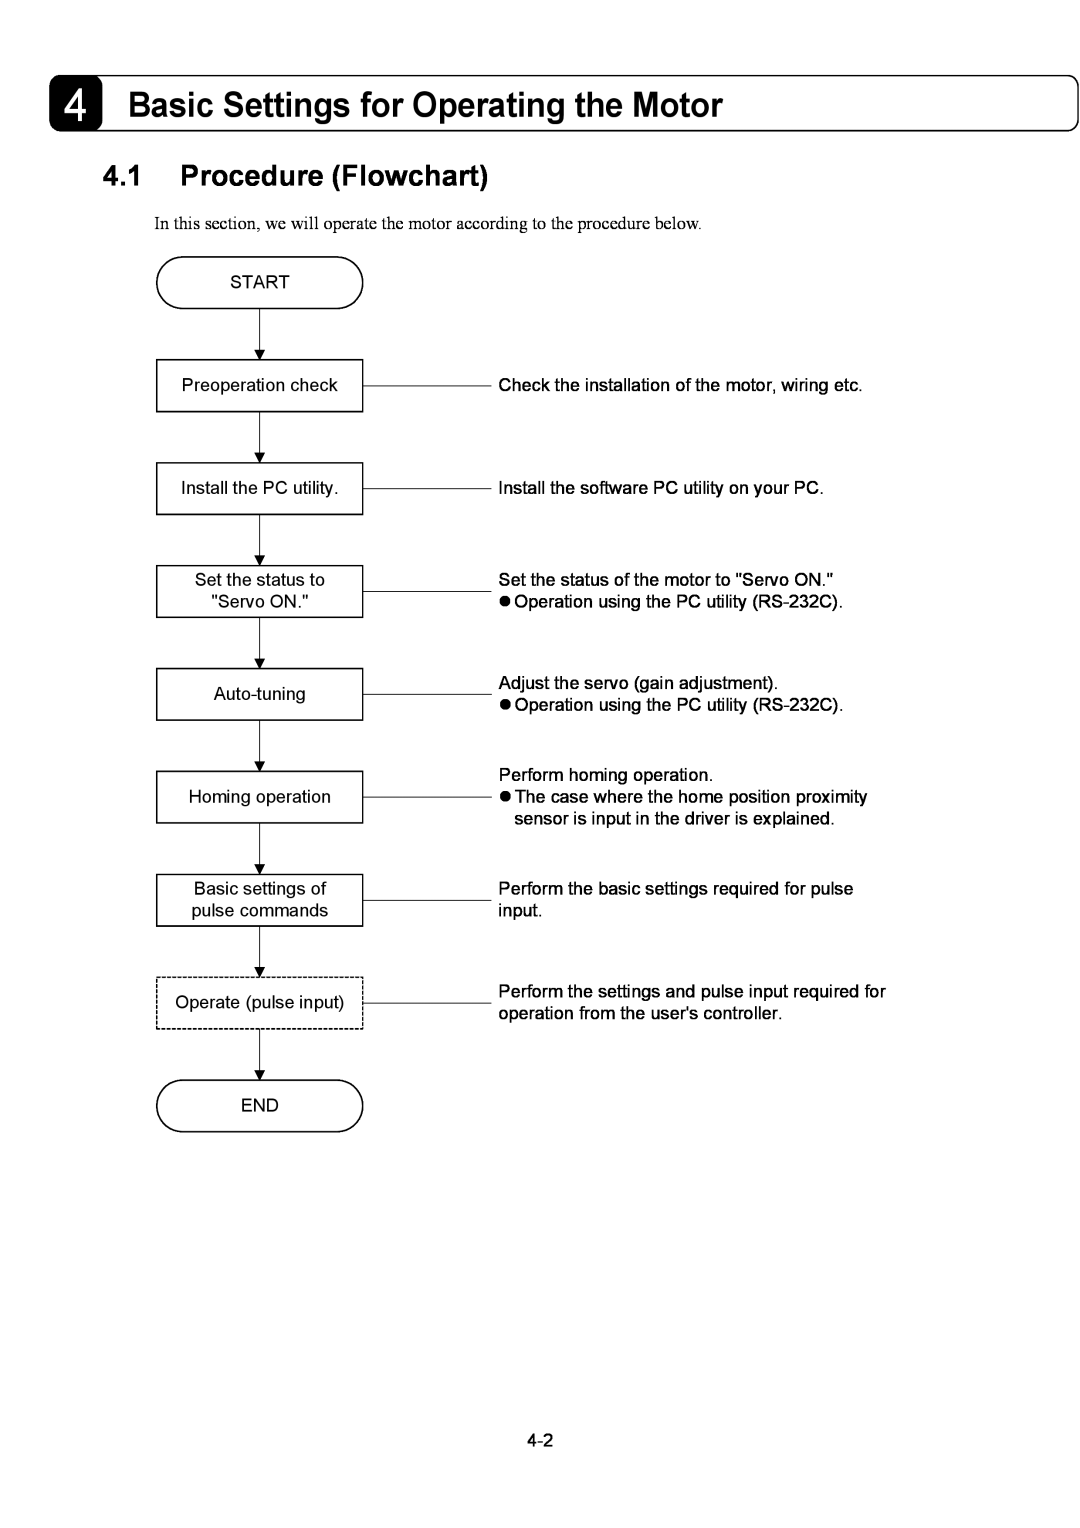 Parker Hannifin G2 manual Basic Settings for Operating the Motor, Procedure Flowchart 